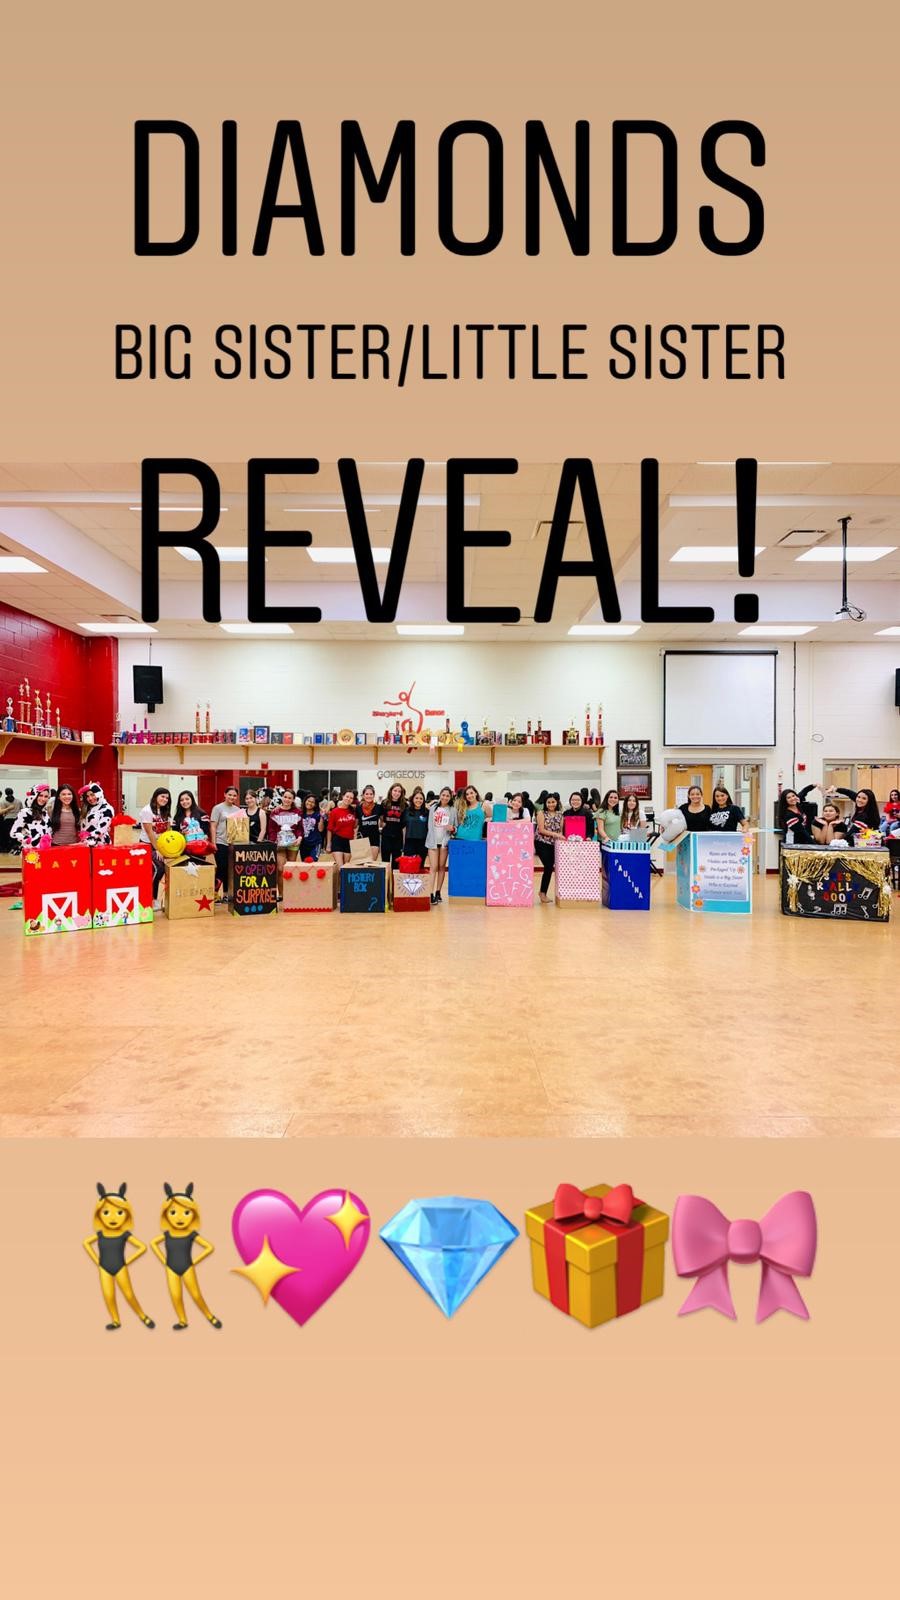 Big Sister and Little Sister Reveal